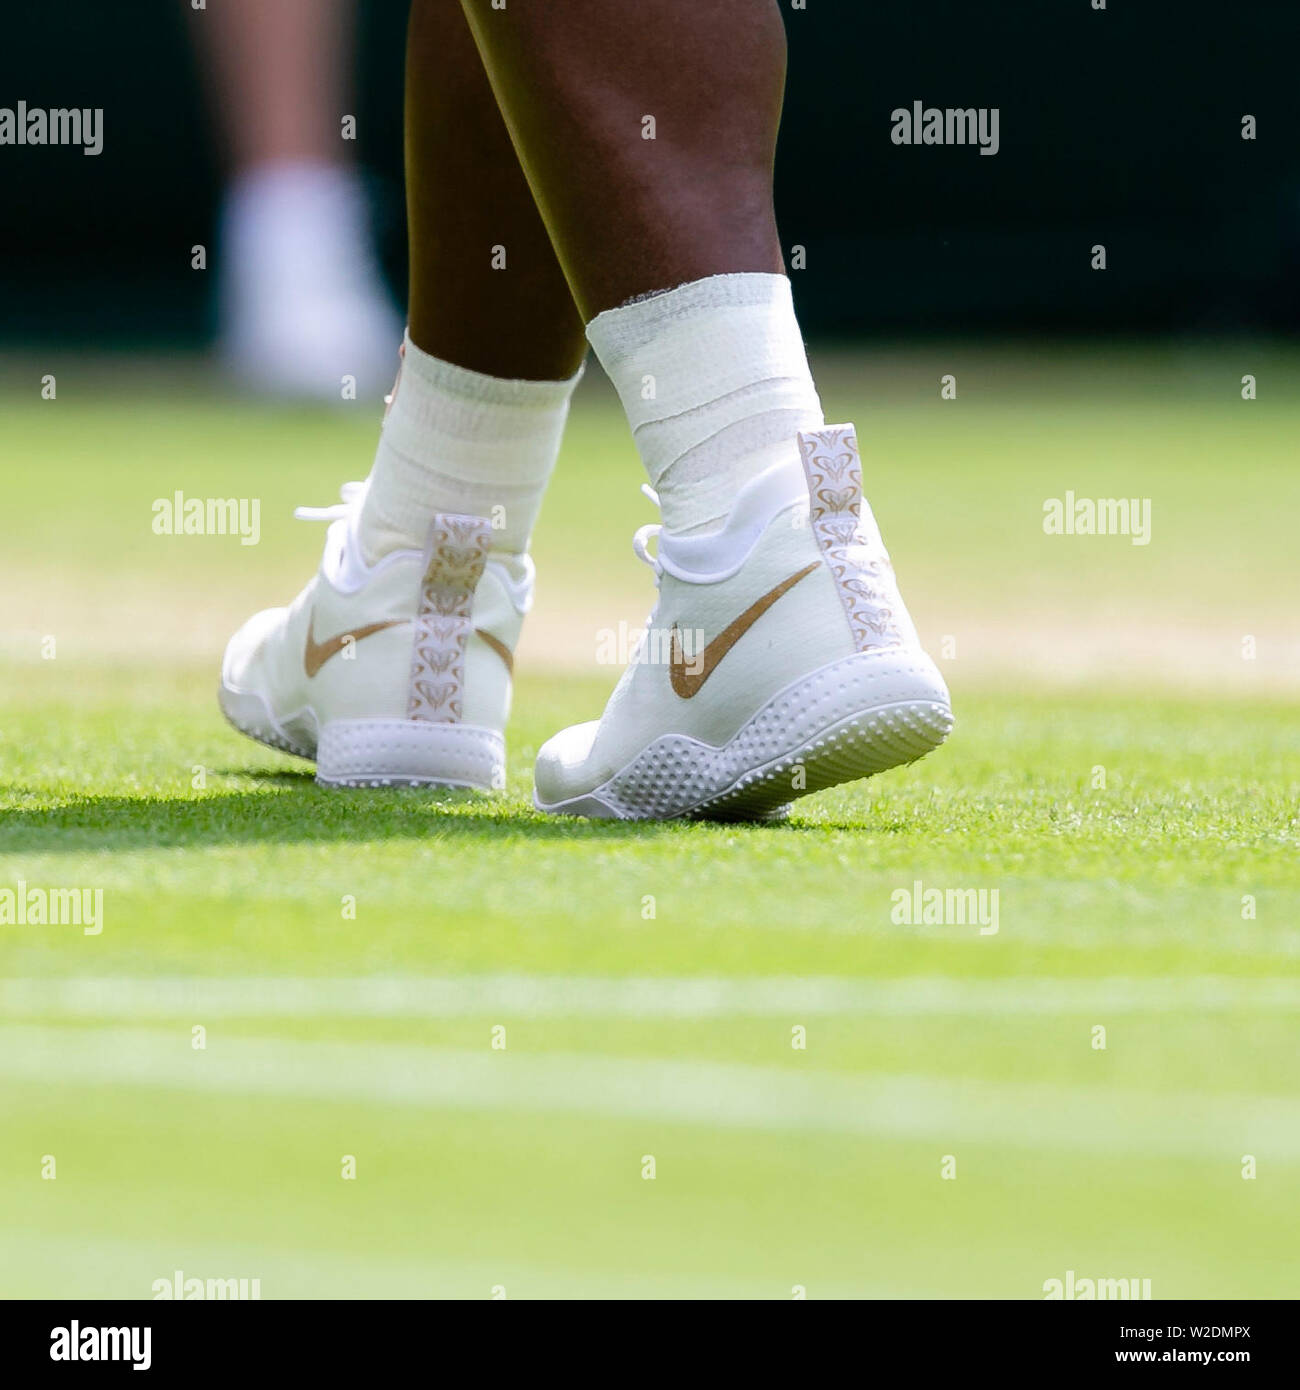 London, UK, 8th July 2019: Nike shoes from Serena Williams of USA during  the 4th round at day 8 at the Wimbledon Tennis Championships 2019 at the  All England Lawn Tennis and